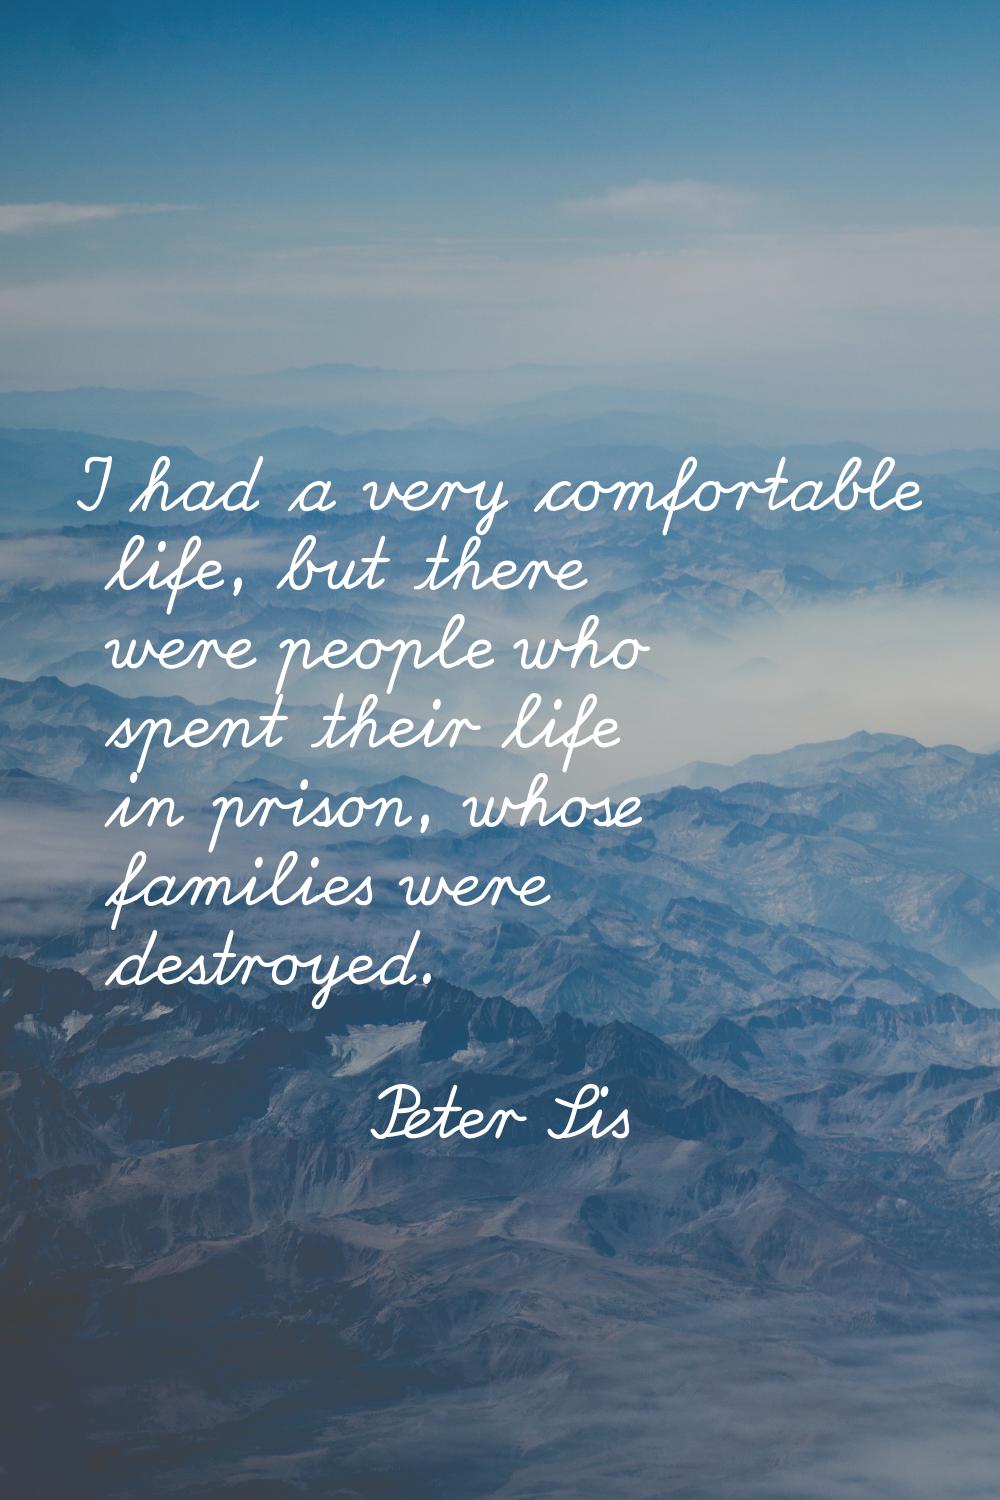 I had a very comfortable life, but there were people who spent their life in prison, whose families